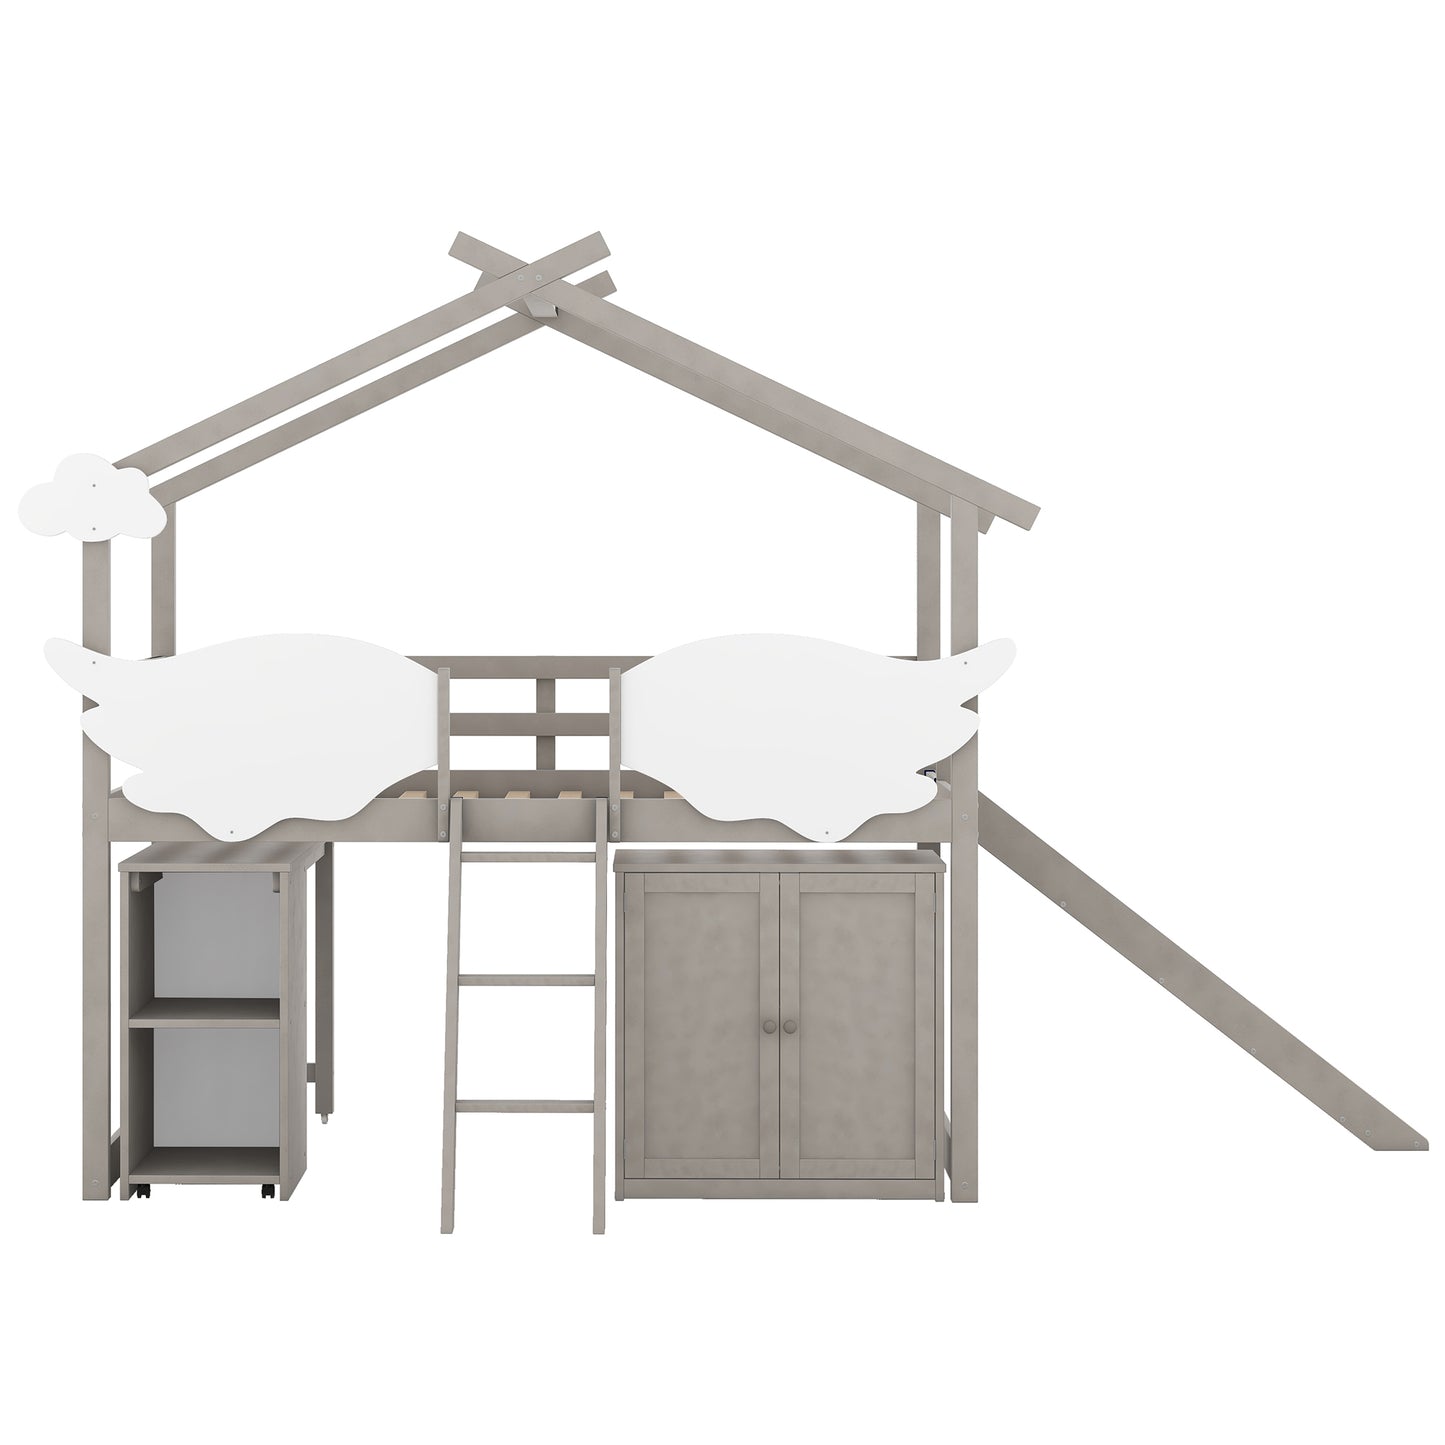 Twin Size House Loft Bed with Wardrobe, Slide and Ladder, Wing-Shaped Fence, Pullable Desk with Storage, Worn Gray+White